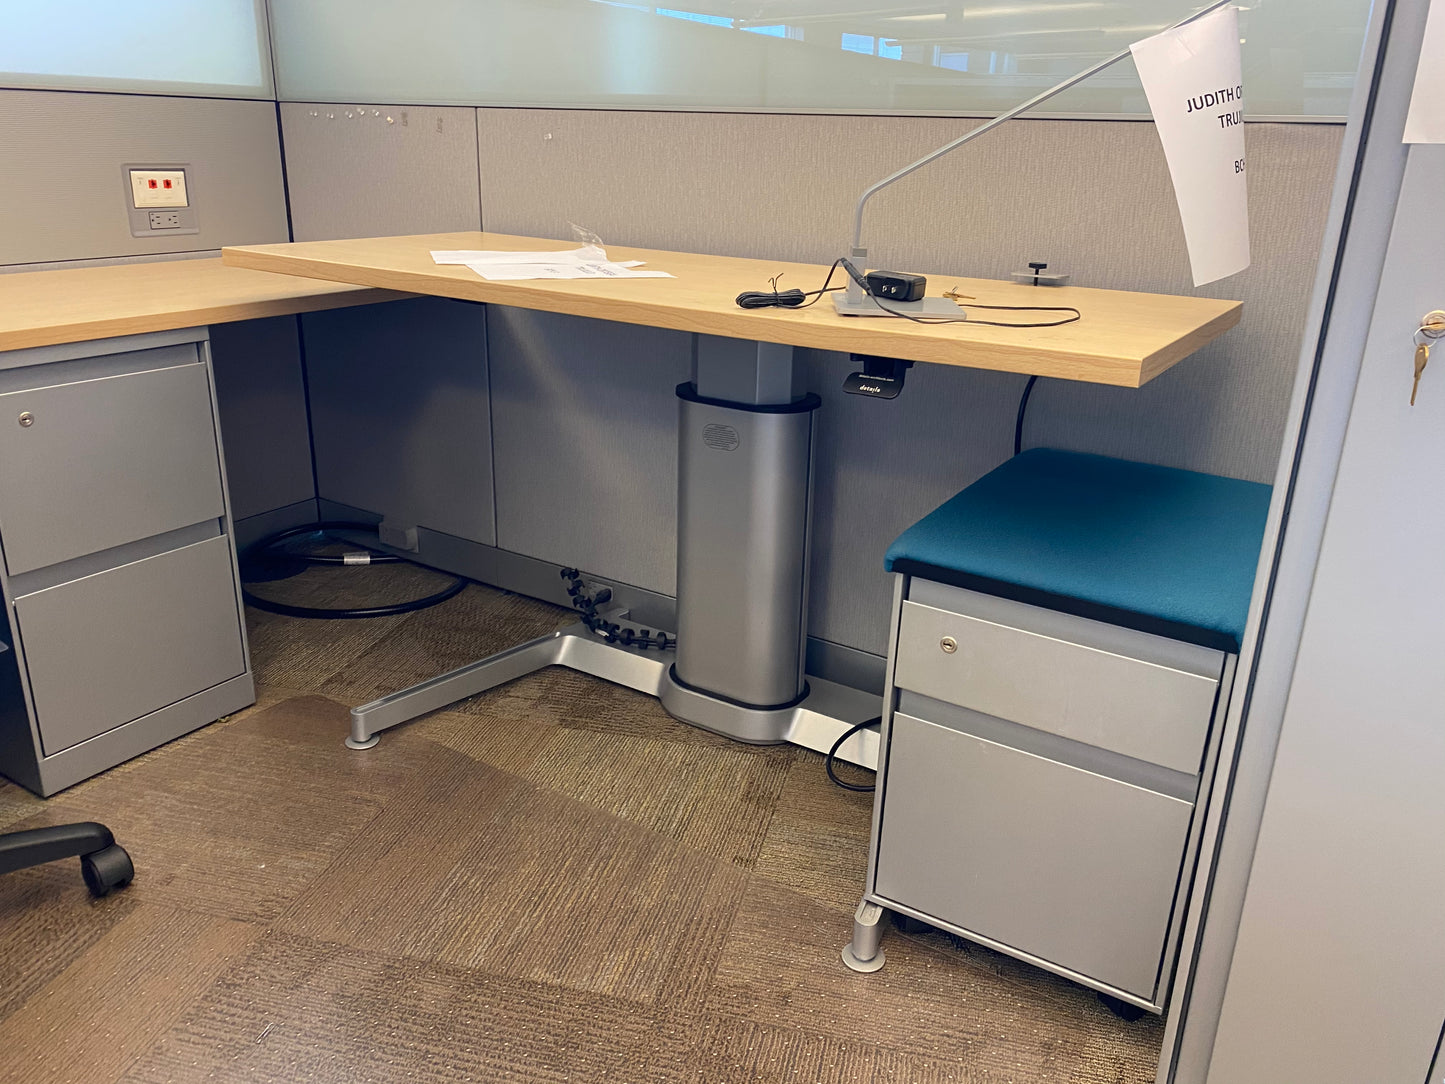 Steelcase Airtouch adjustable height desk with mobile ped